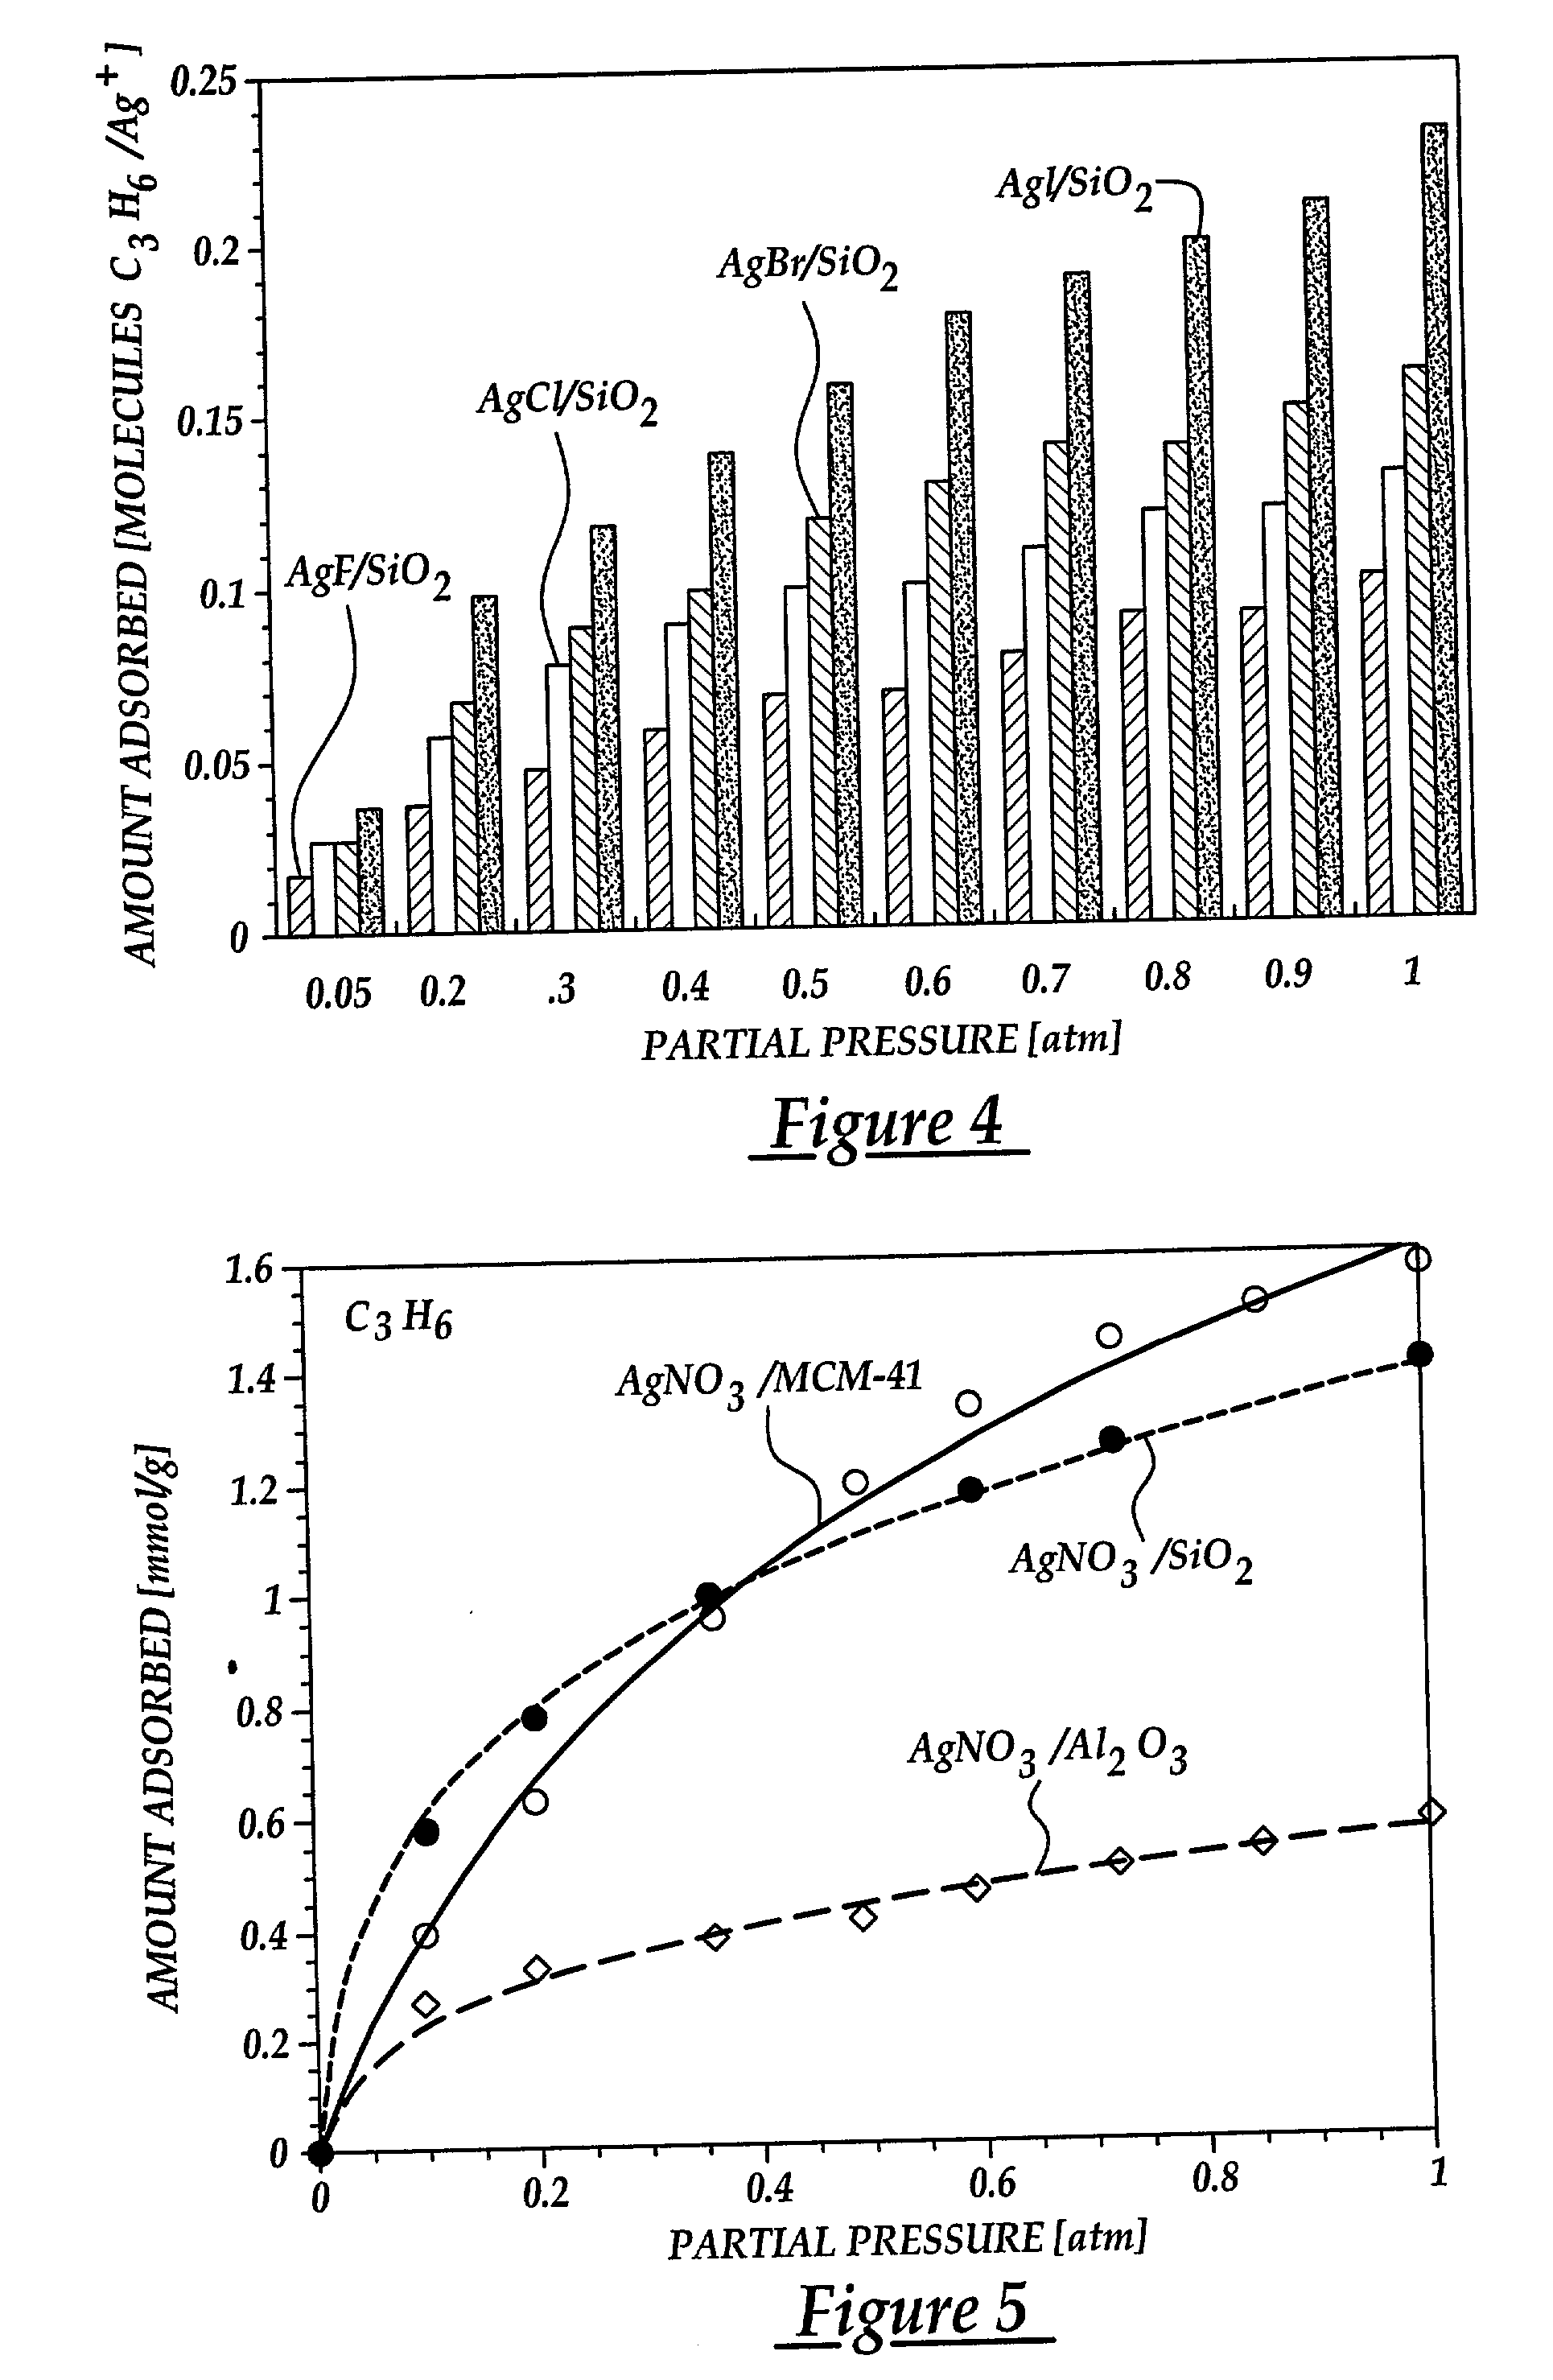 Selective adsorption of alkenes using supported metal compounds